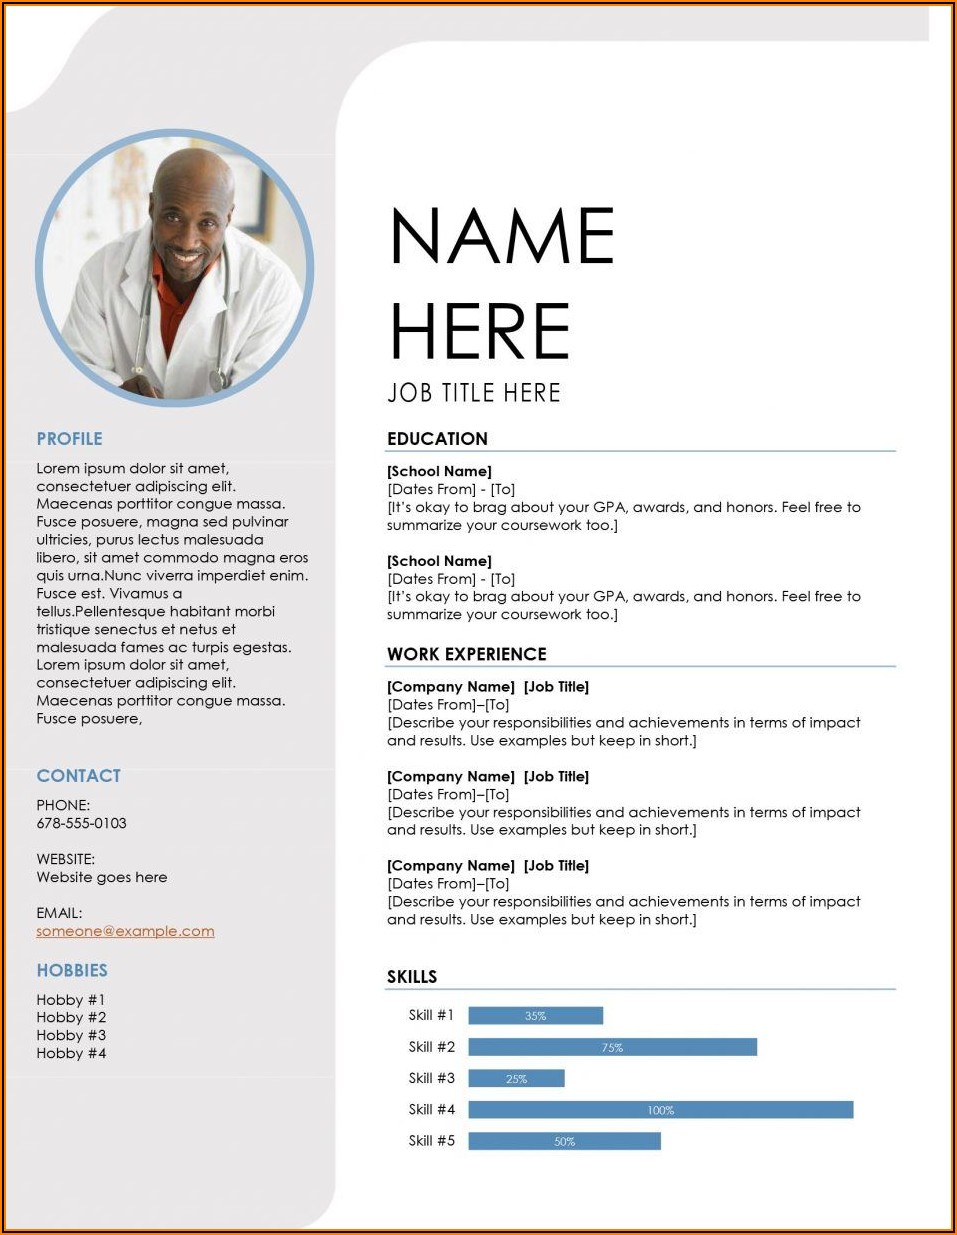 Microsoft Word Templates For Resumes